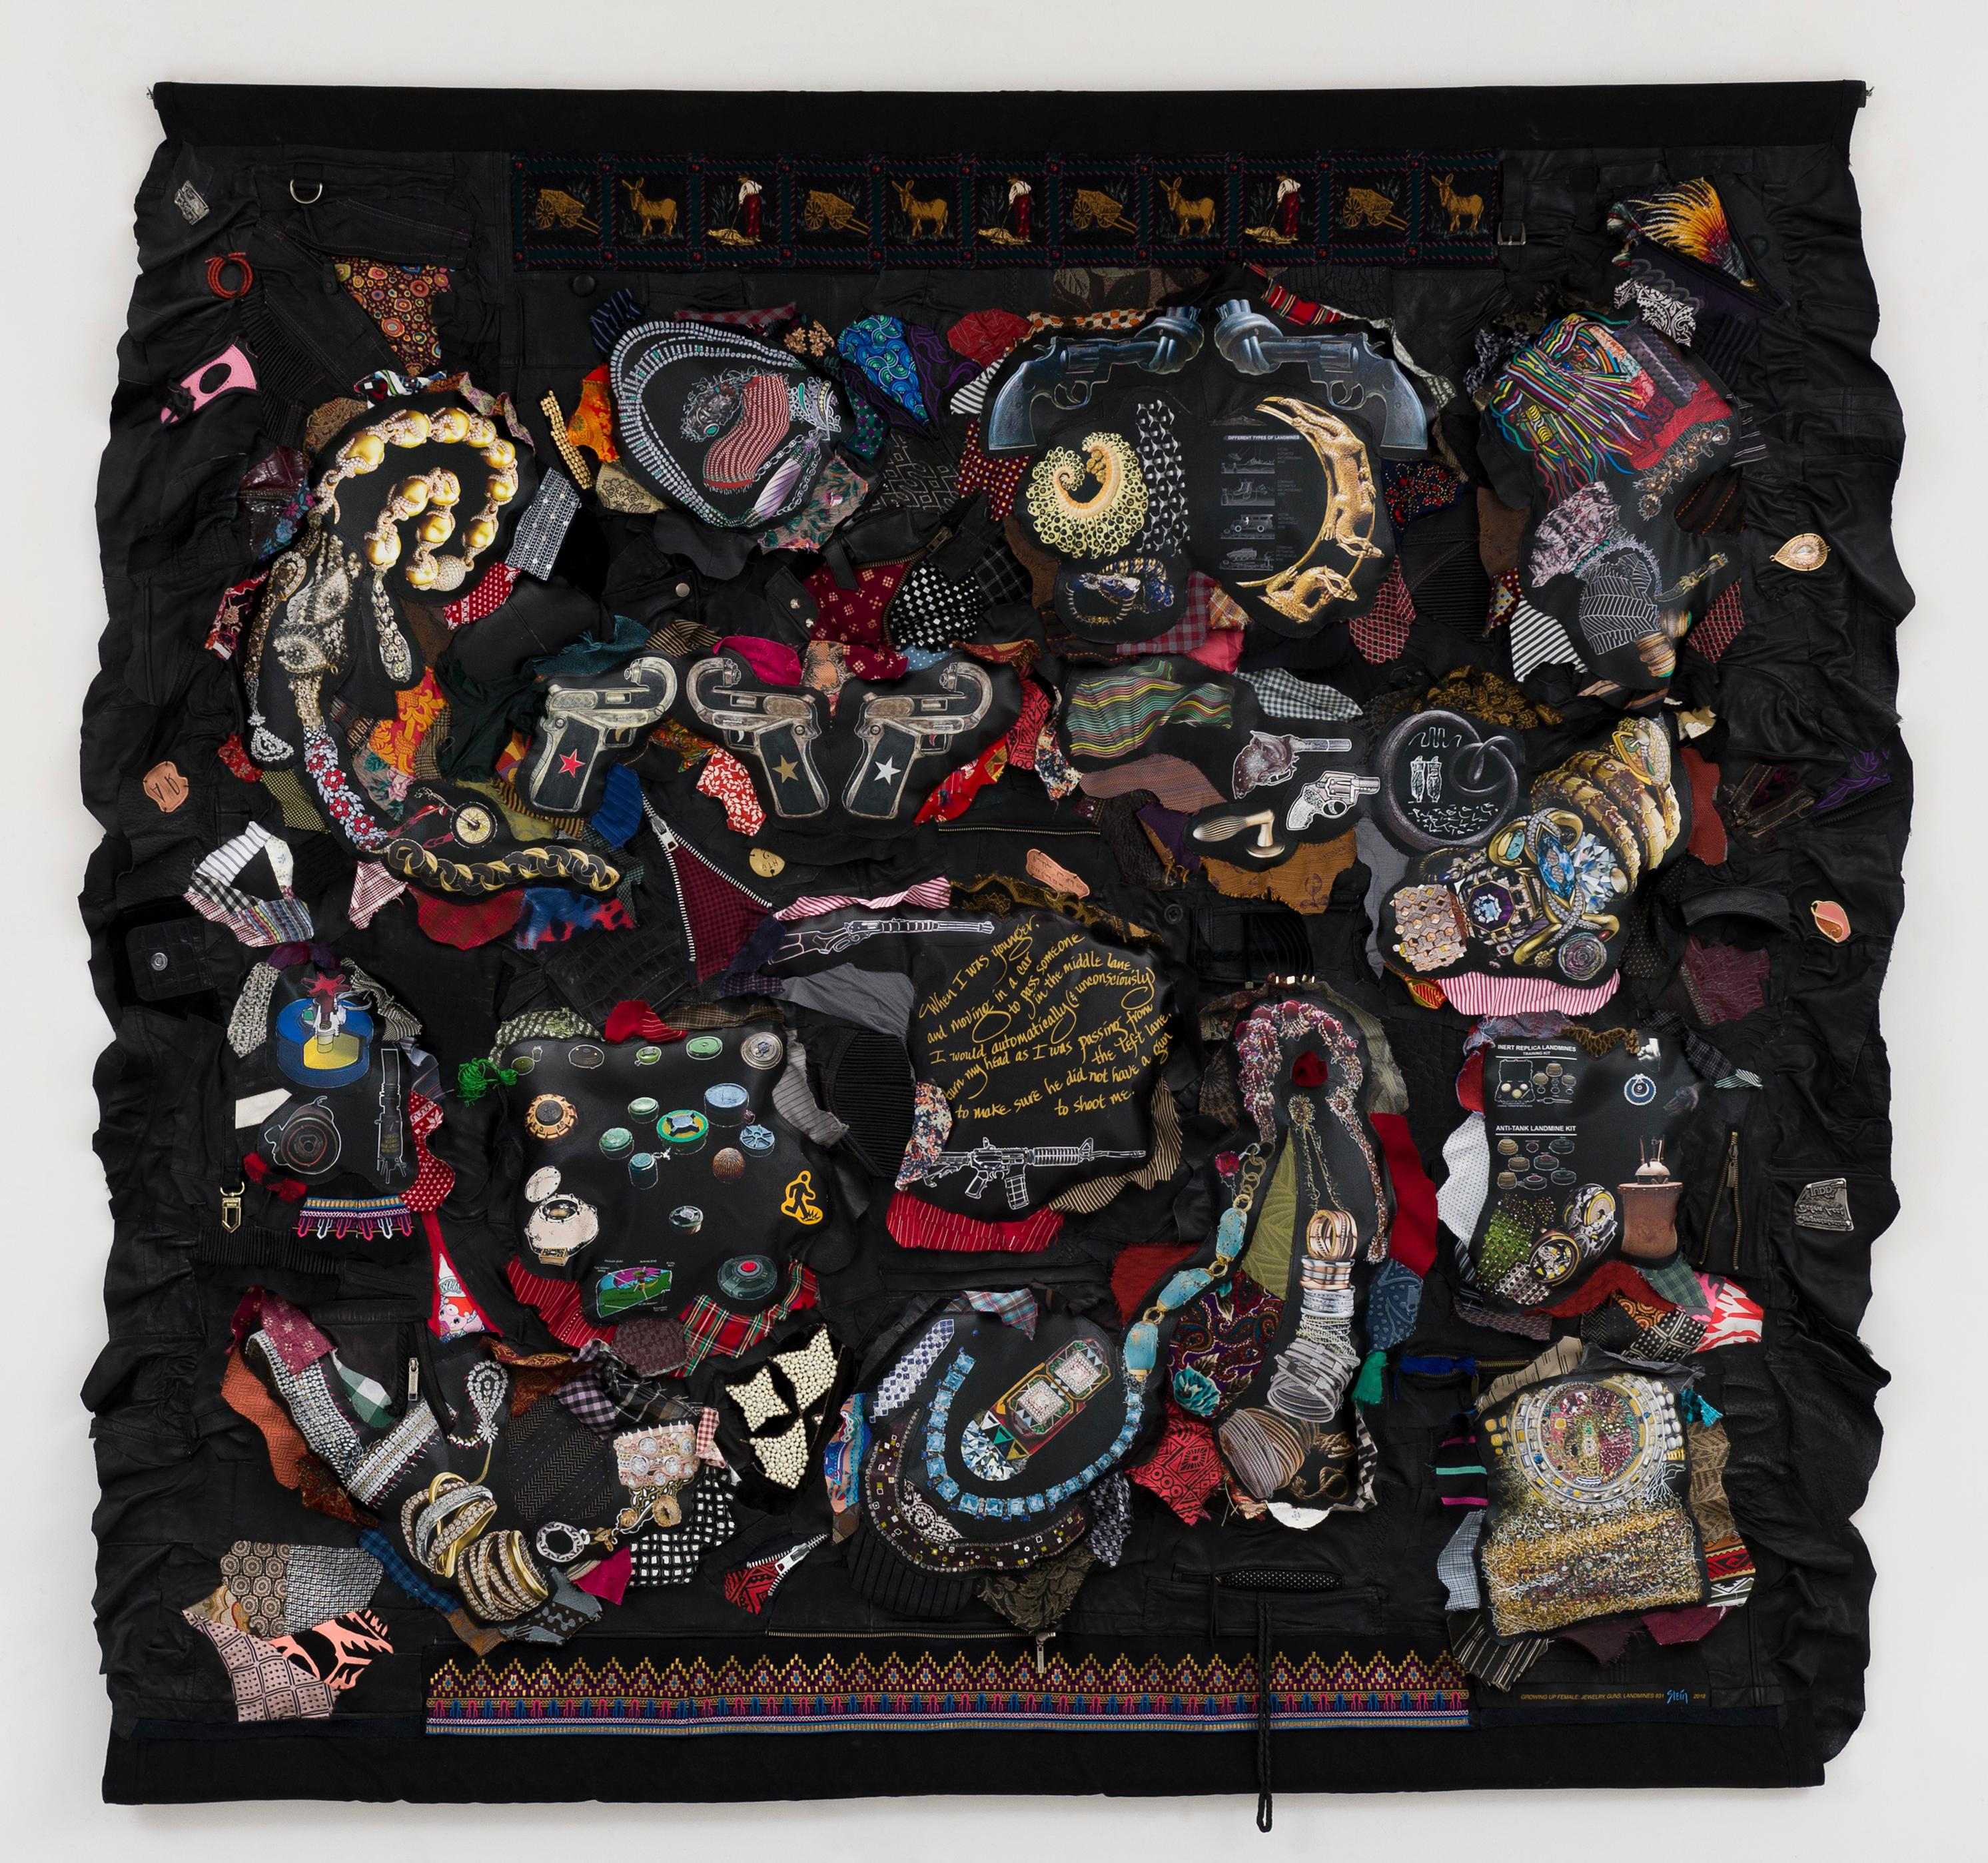 Feminist Contemporary Fabric Leather Sculptural Tapestry - Growing Up Female 931 - Mixed Media Art by Linda Stein